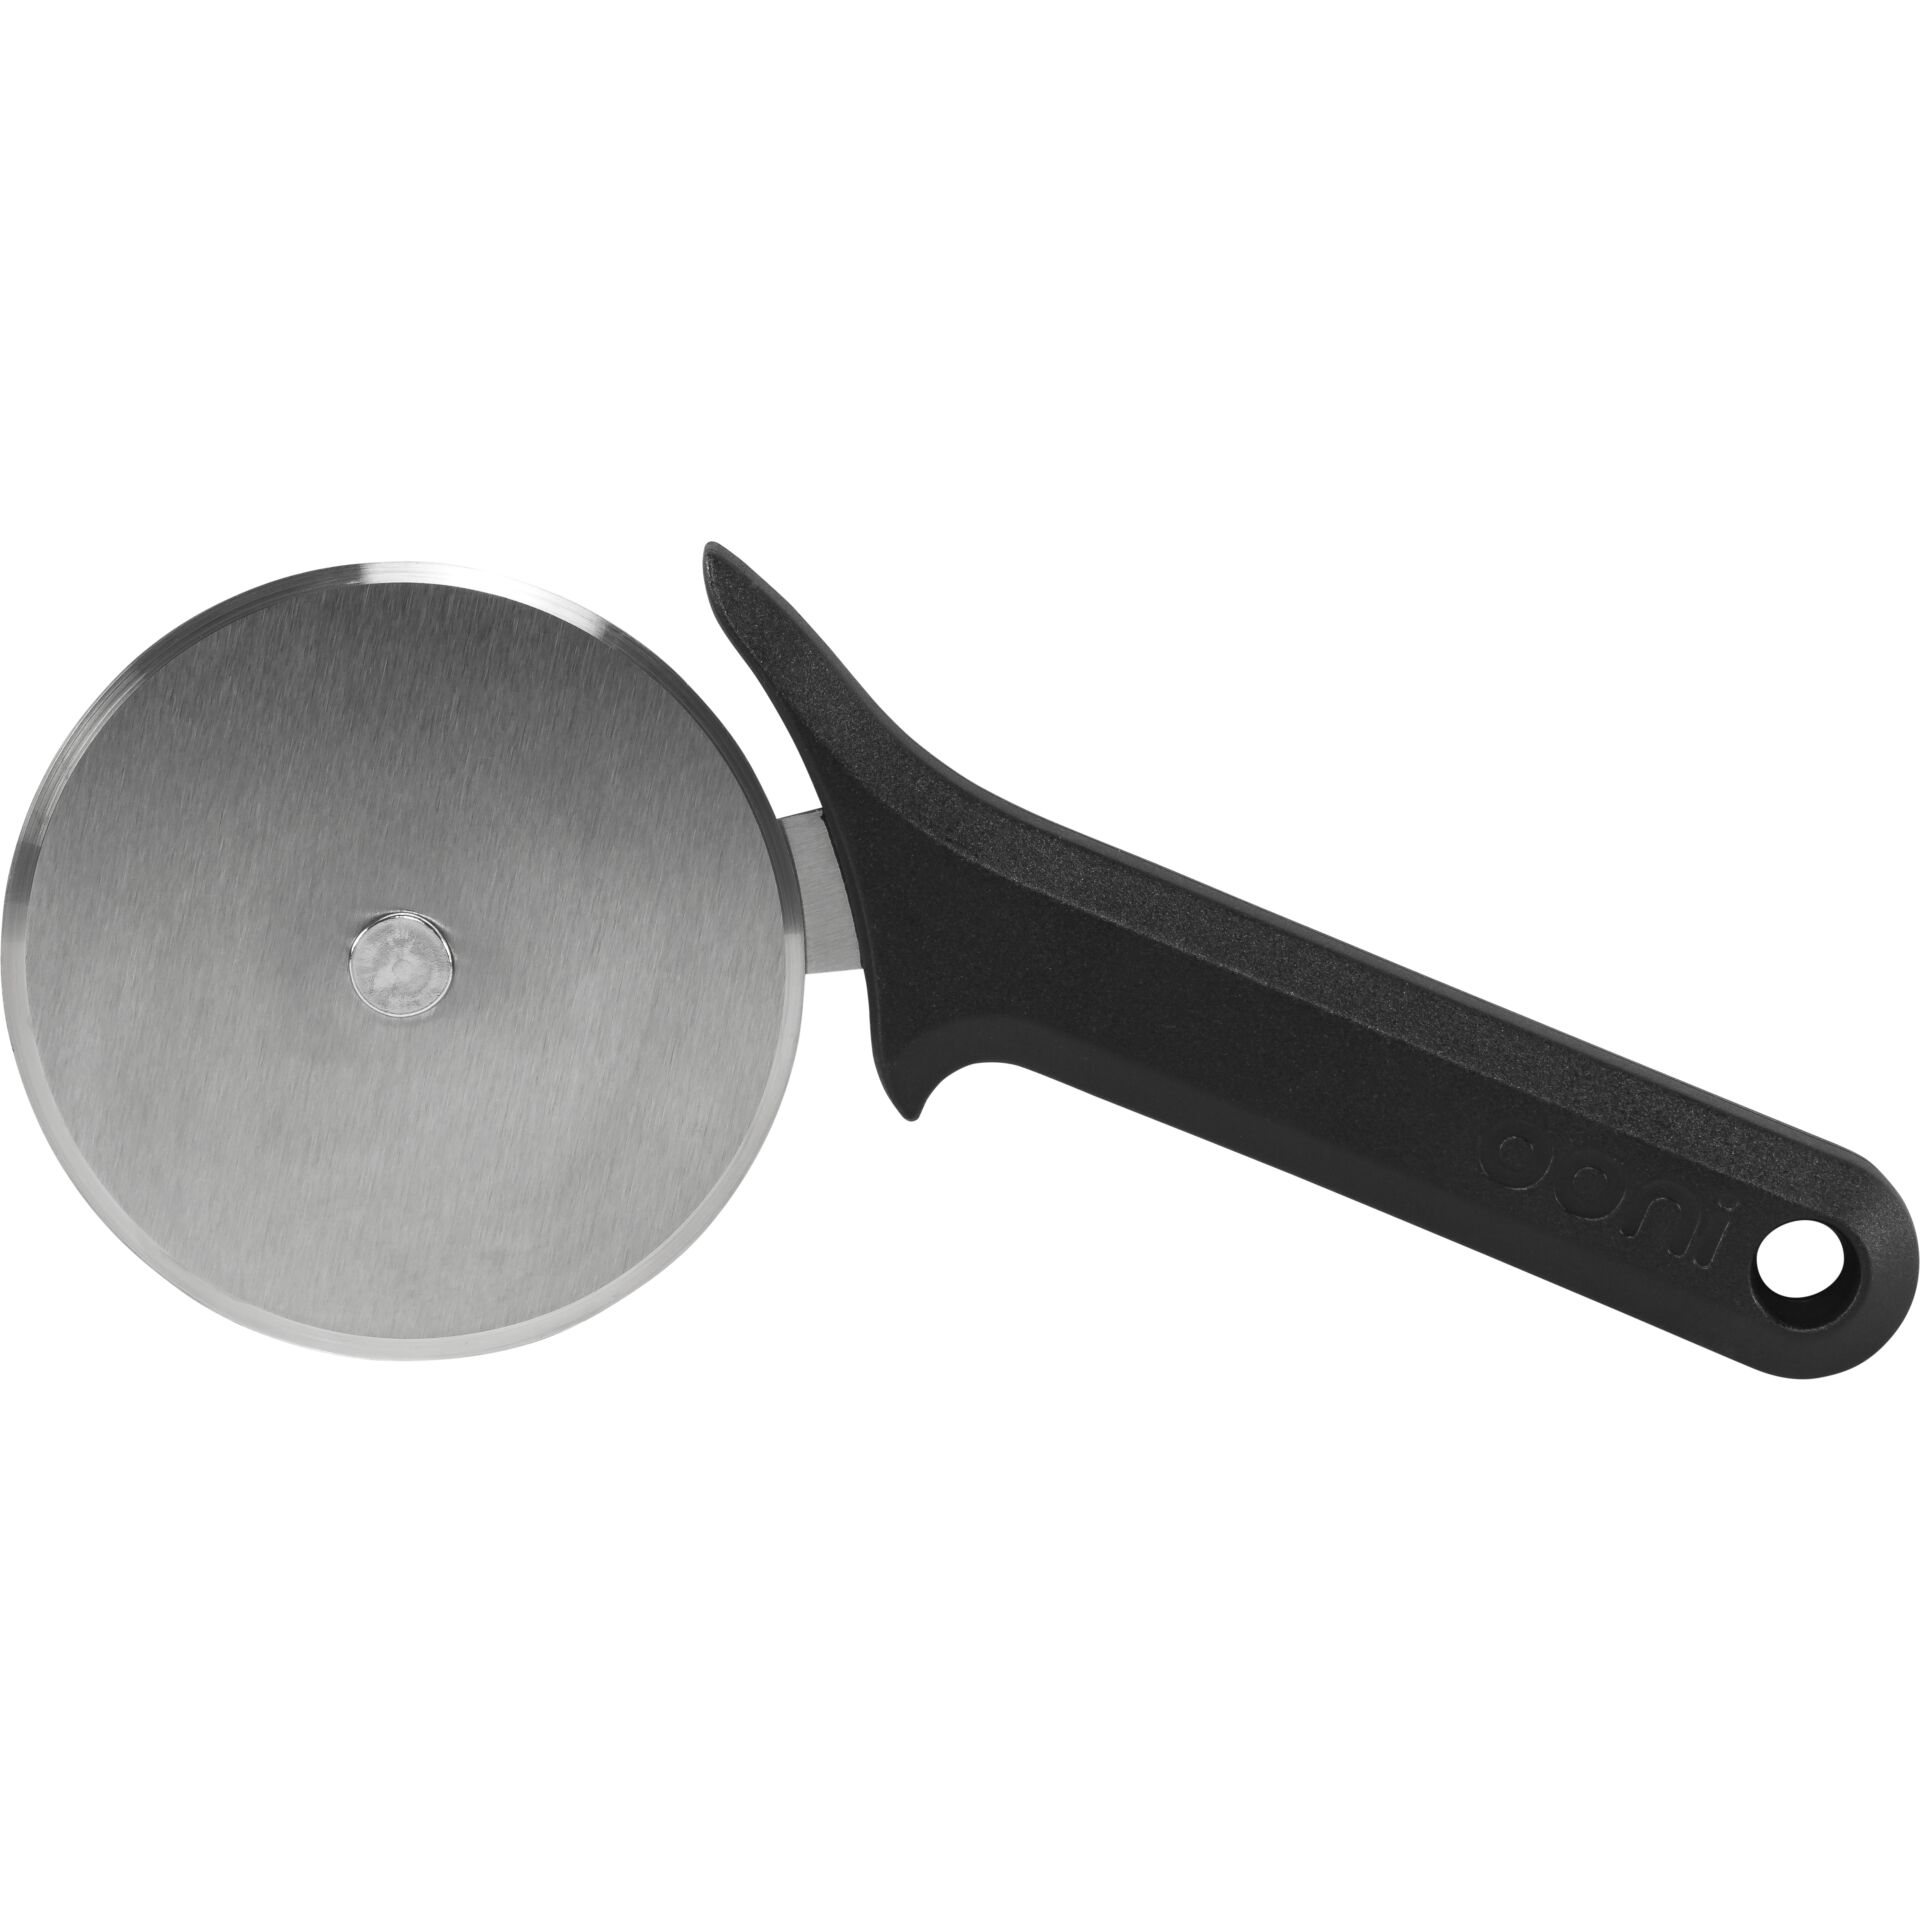 Ooni Pizza cutter